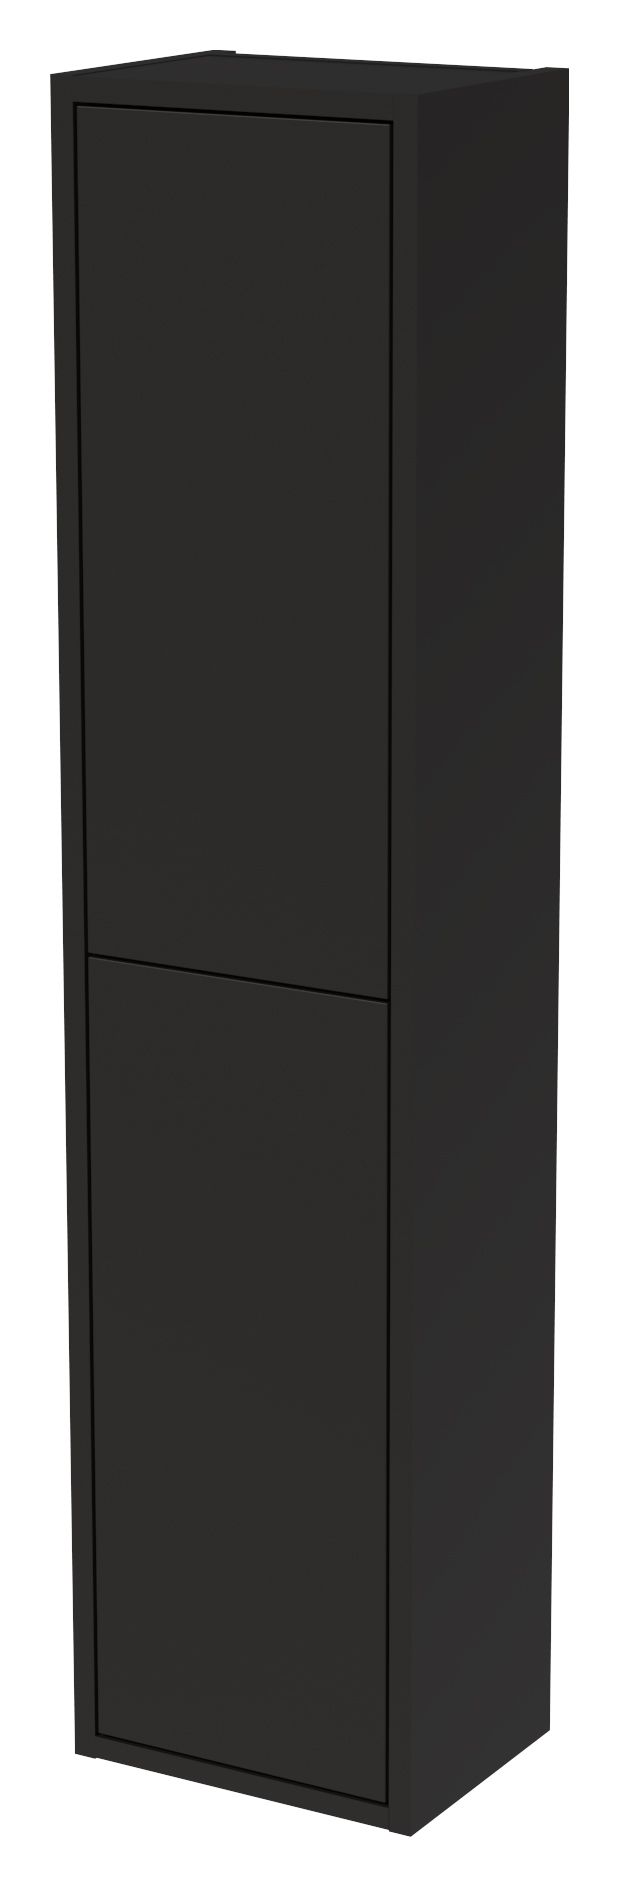 Image of Wickes Tallinn Graphite Push to Open Wall Hung Tower Unit - 1300 x 300mm